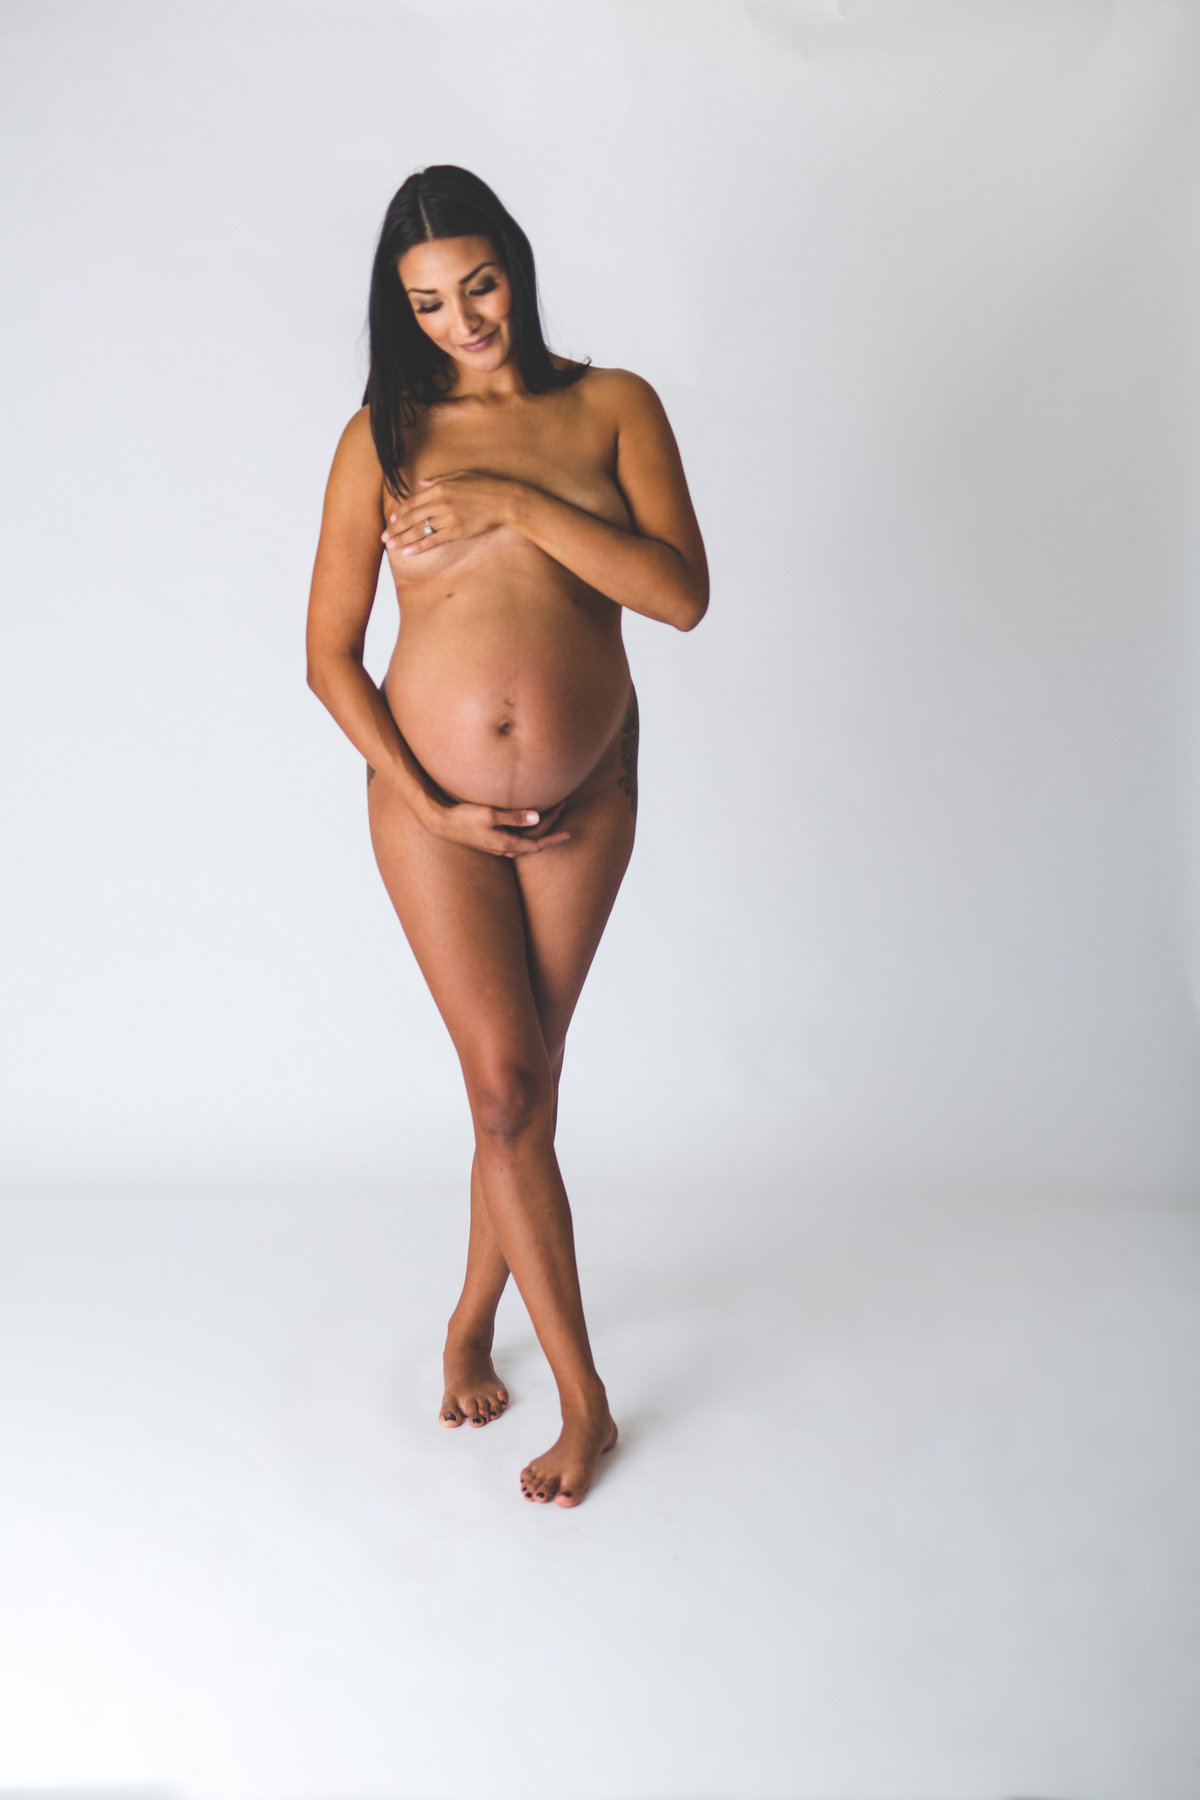 San Antonio Maternity photography session of dark haired woman covering herself with her hands and holding her belly.